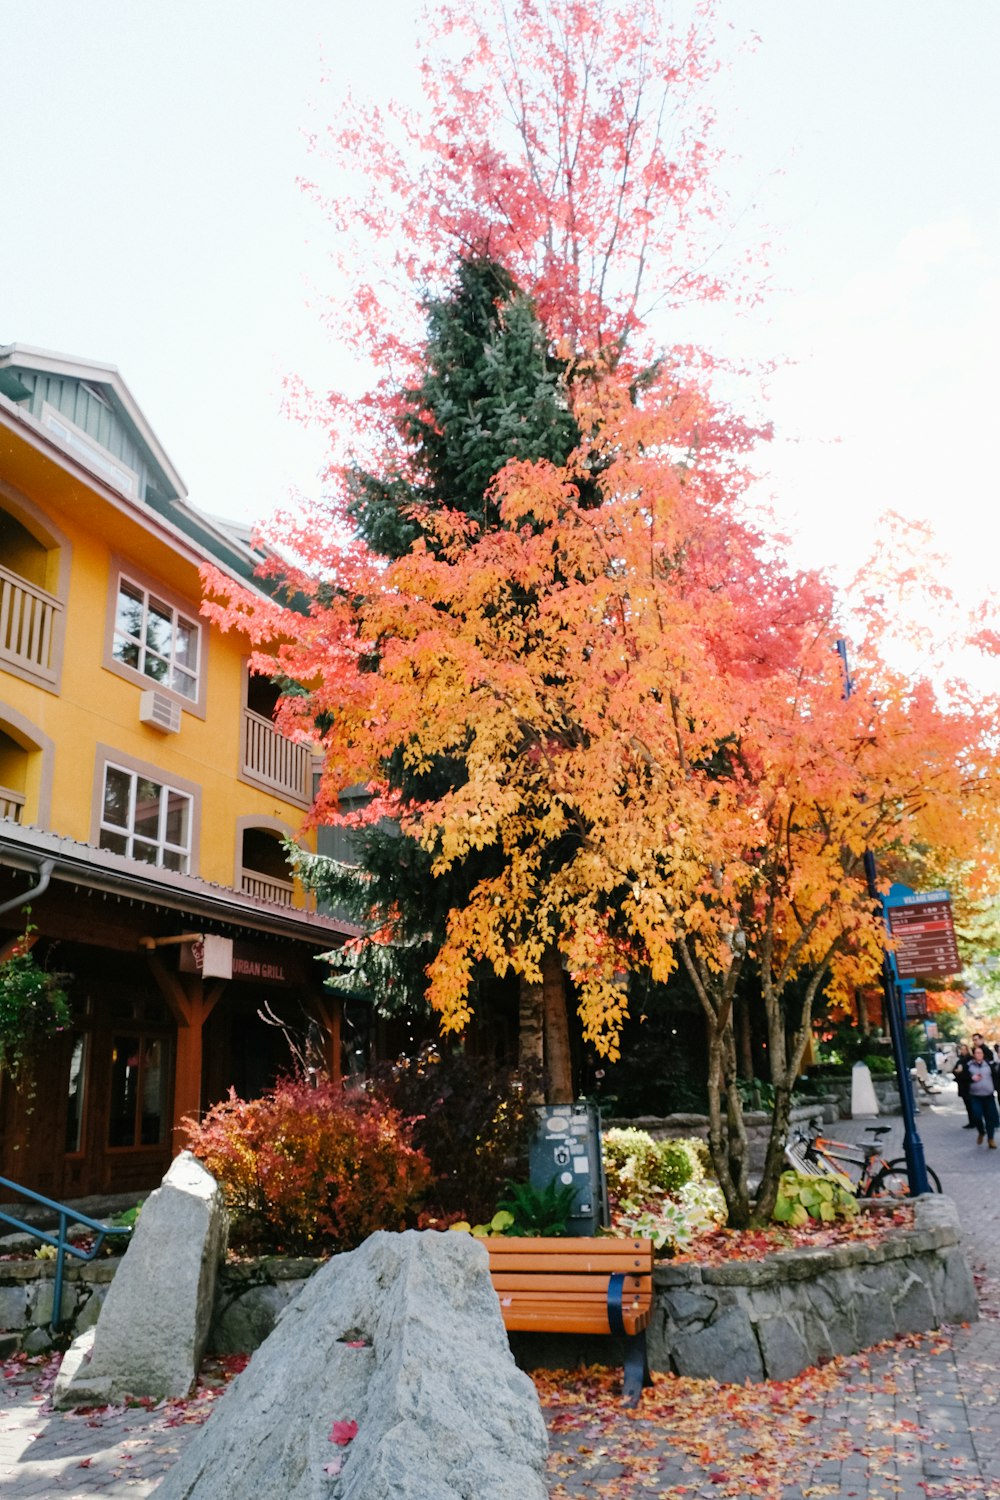 a tree with red leaves in front of a yellow building